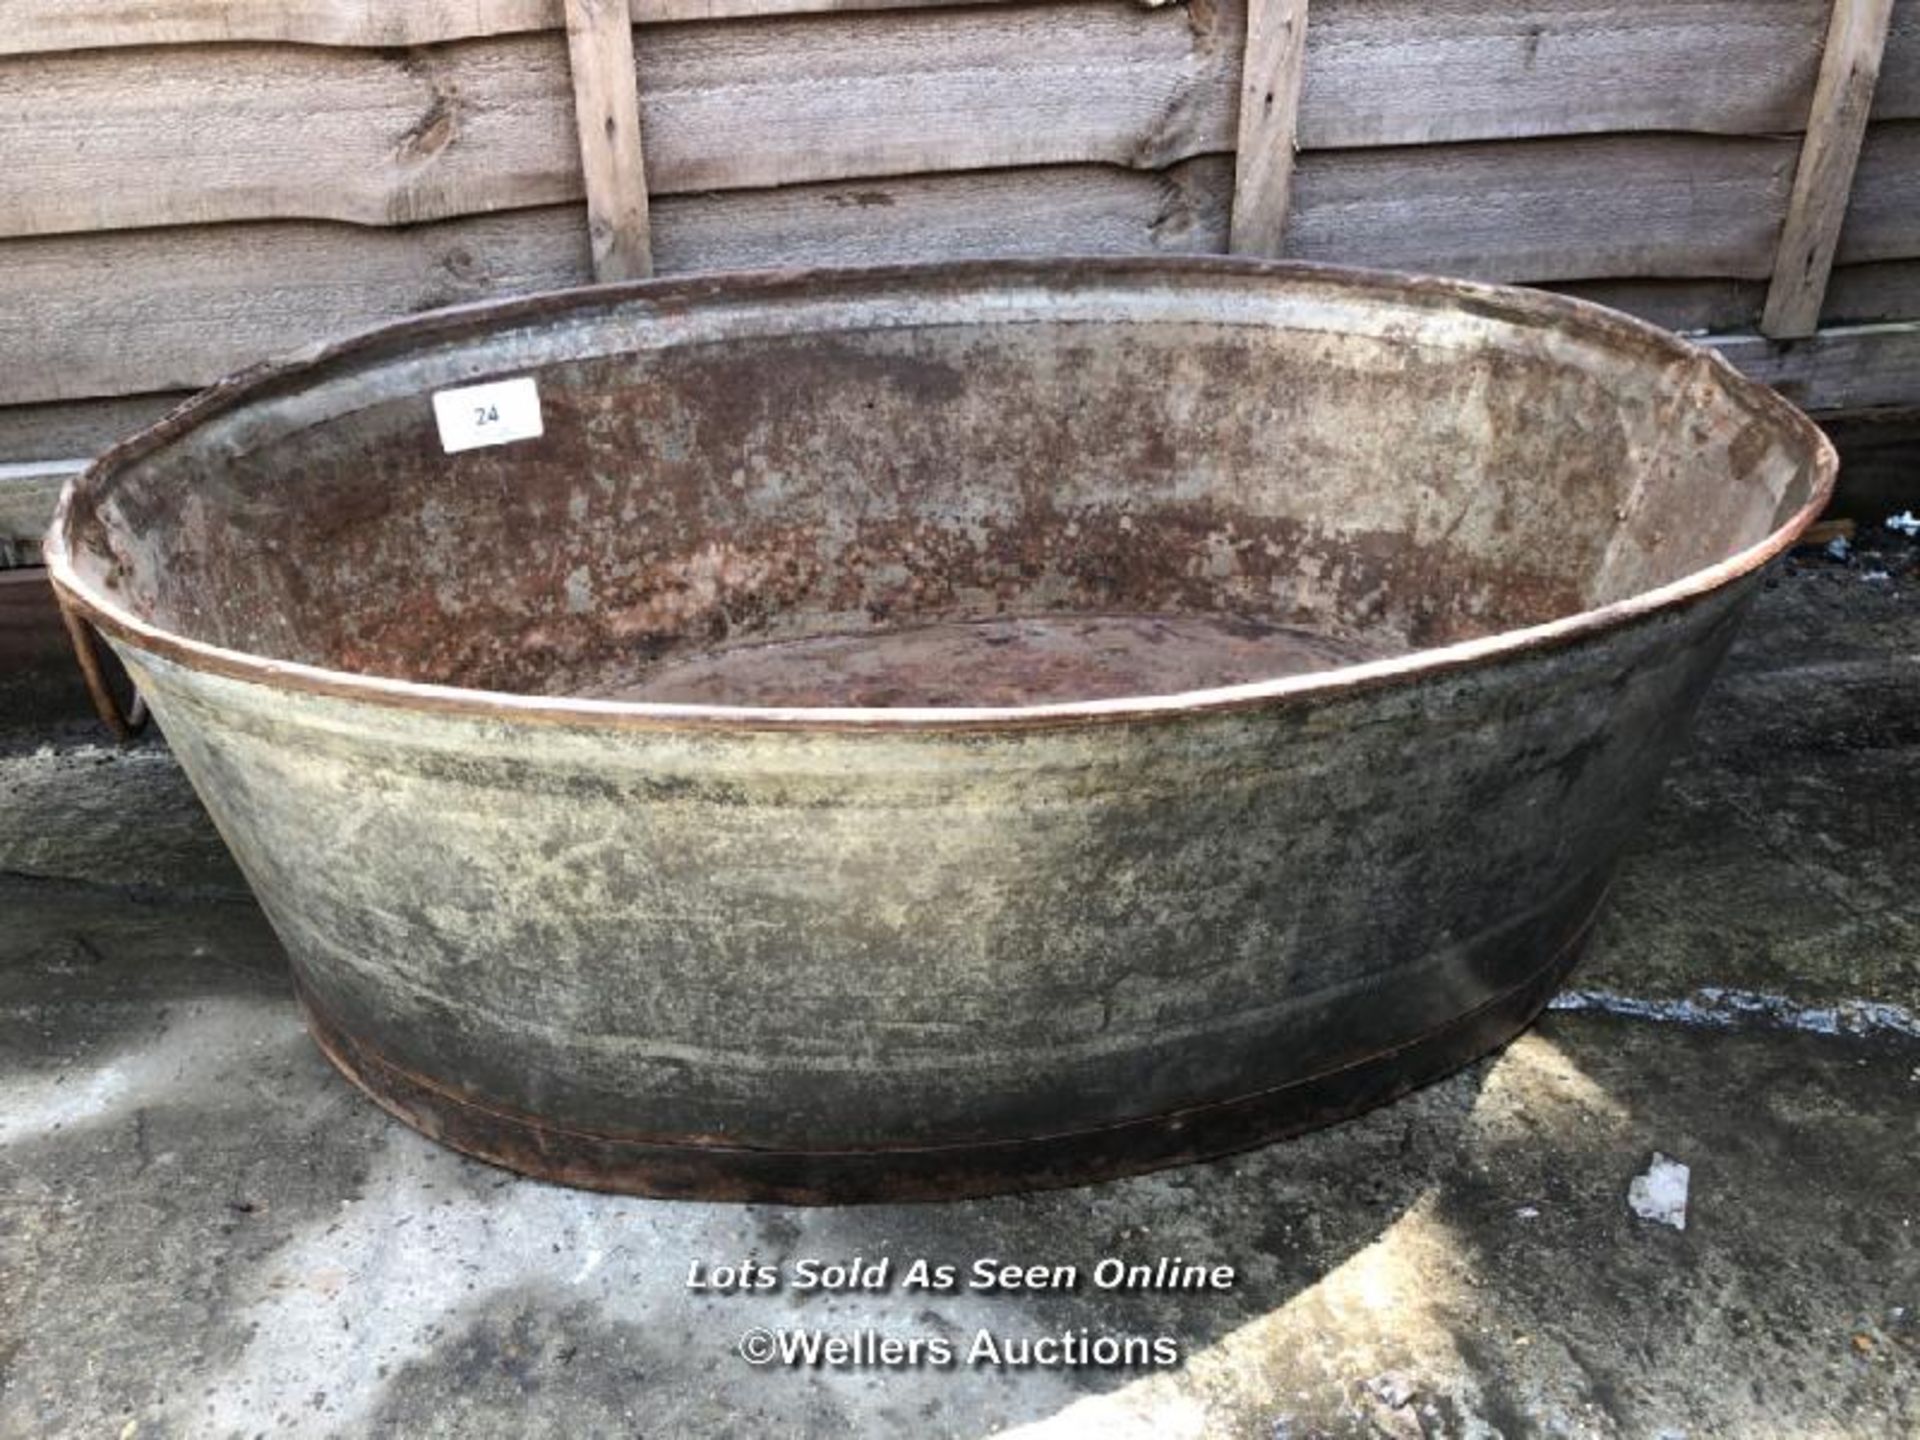 *LARGE GALVANISED TUB WITH HANDLES, 25CM (H) X 80CM (DIA) / COLLECTION LOCATION: WELLERS AUCTIONS (